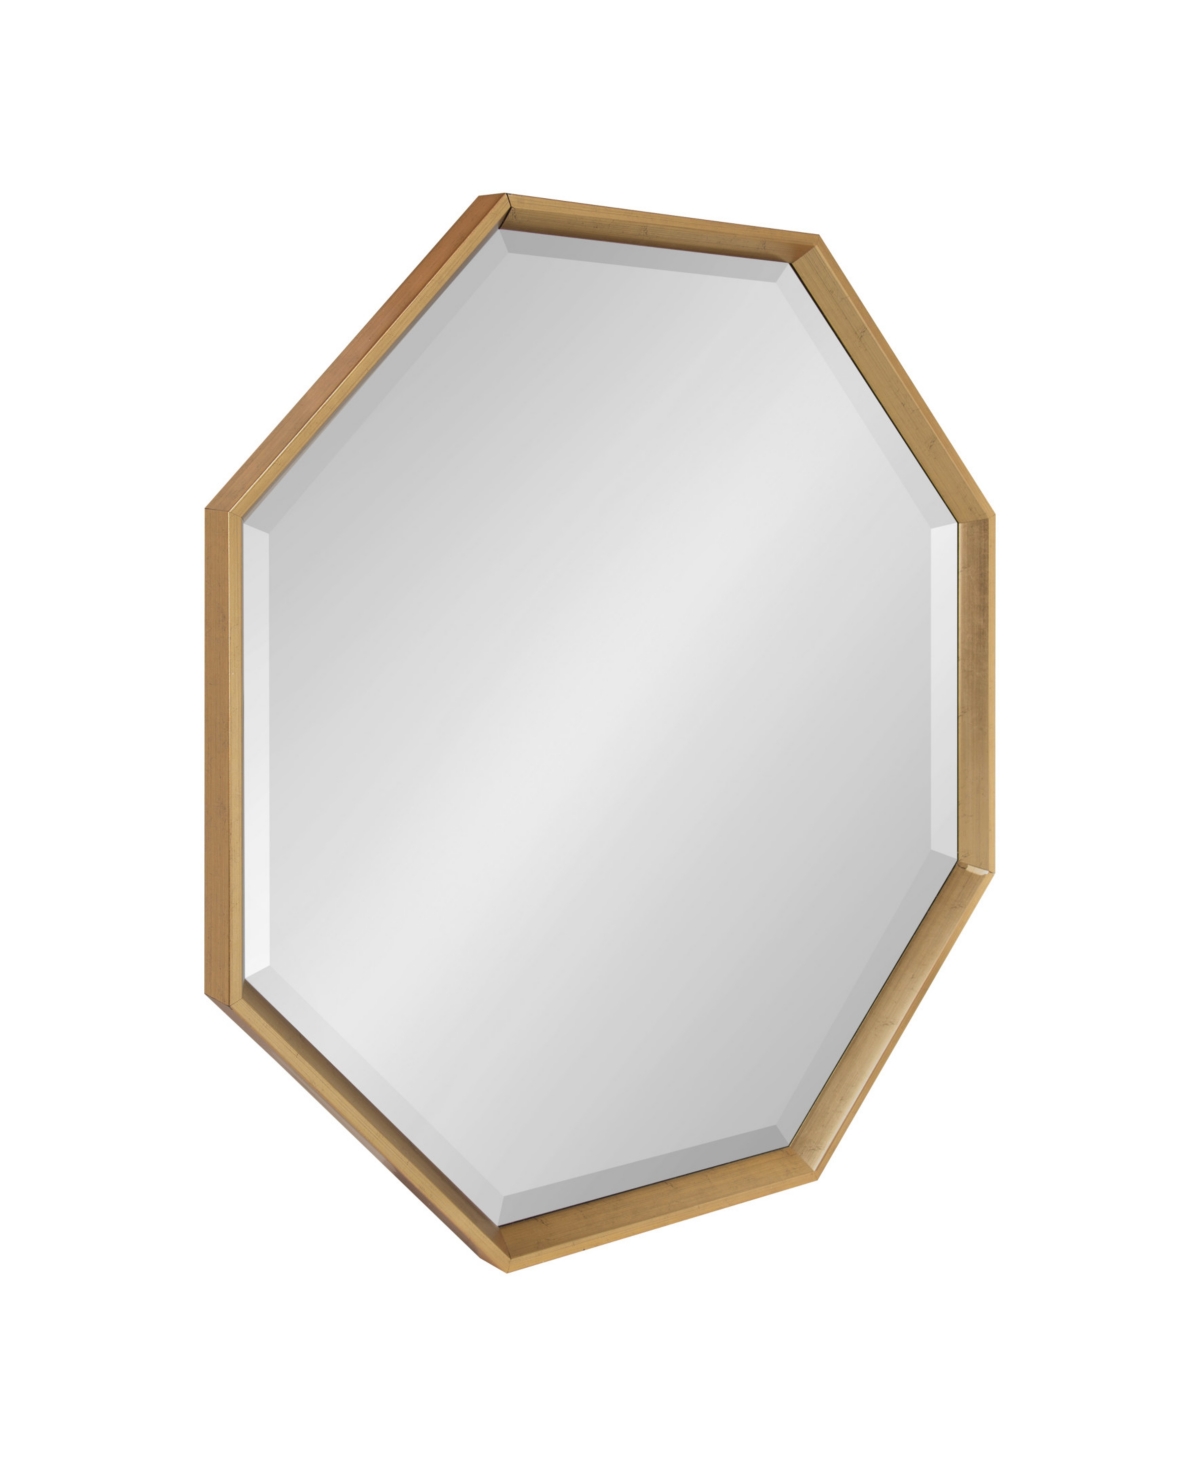 Calter Framed Large Octagon Wall Mirror - 31.5" x 31.5" - Gold